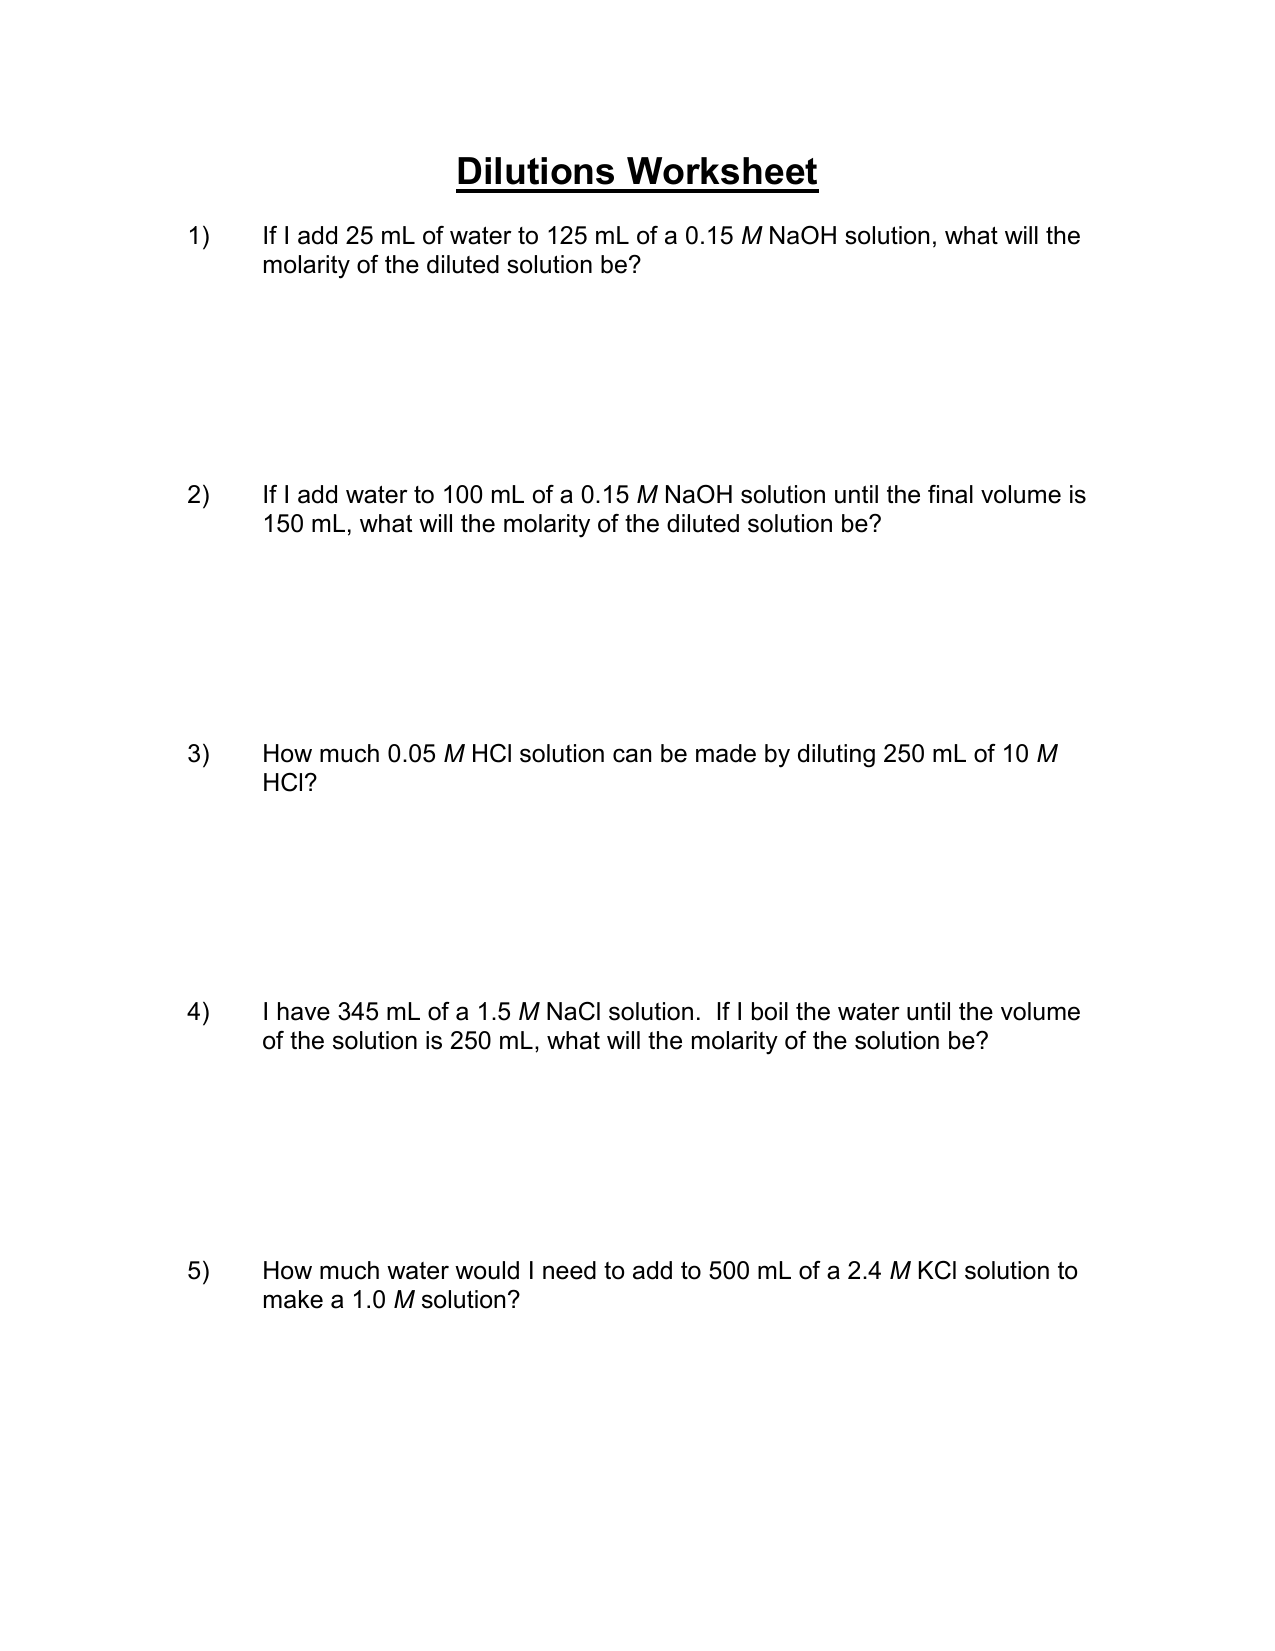 solutions-worksheet-molarity-and-dilution-problems-55-pages-explanation-1-7mb-latest-update